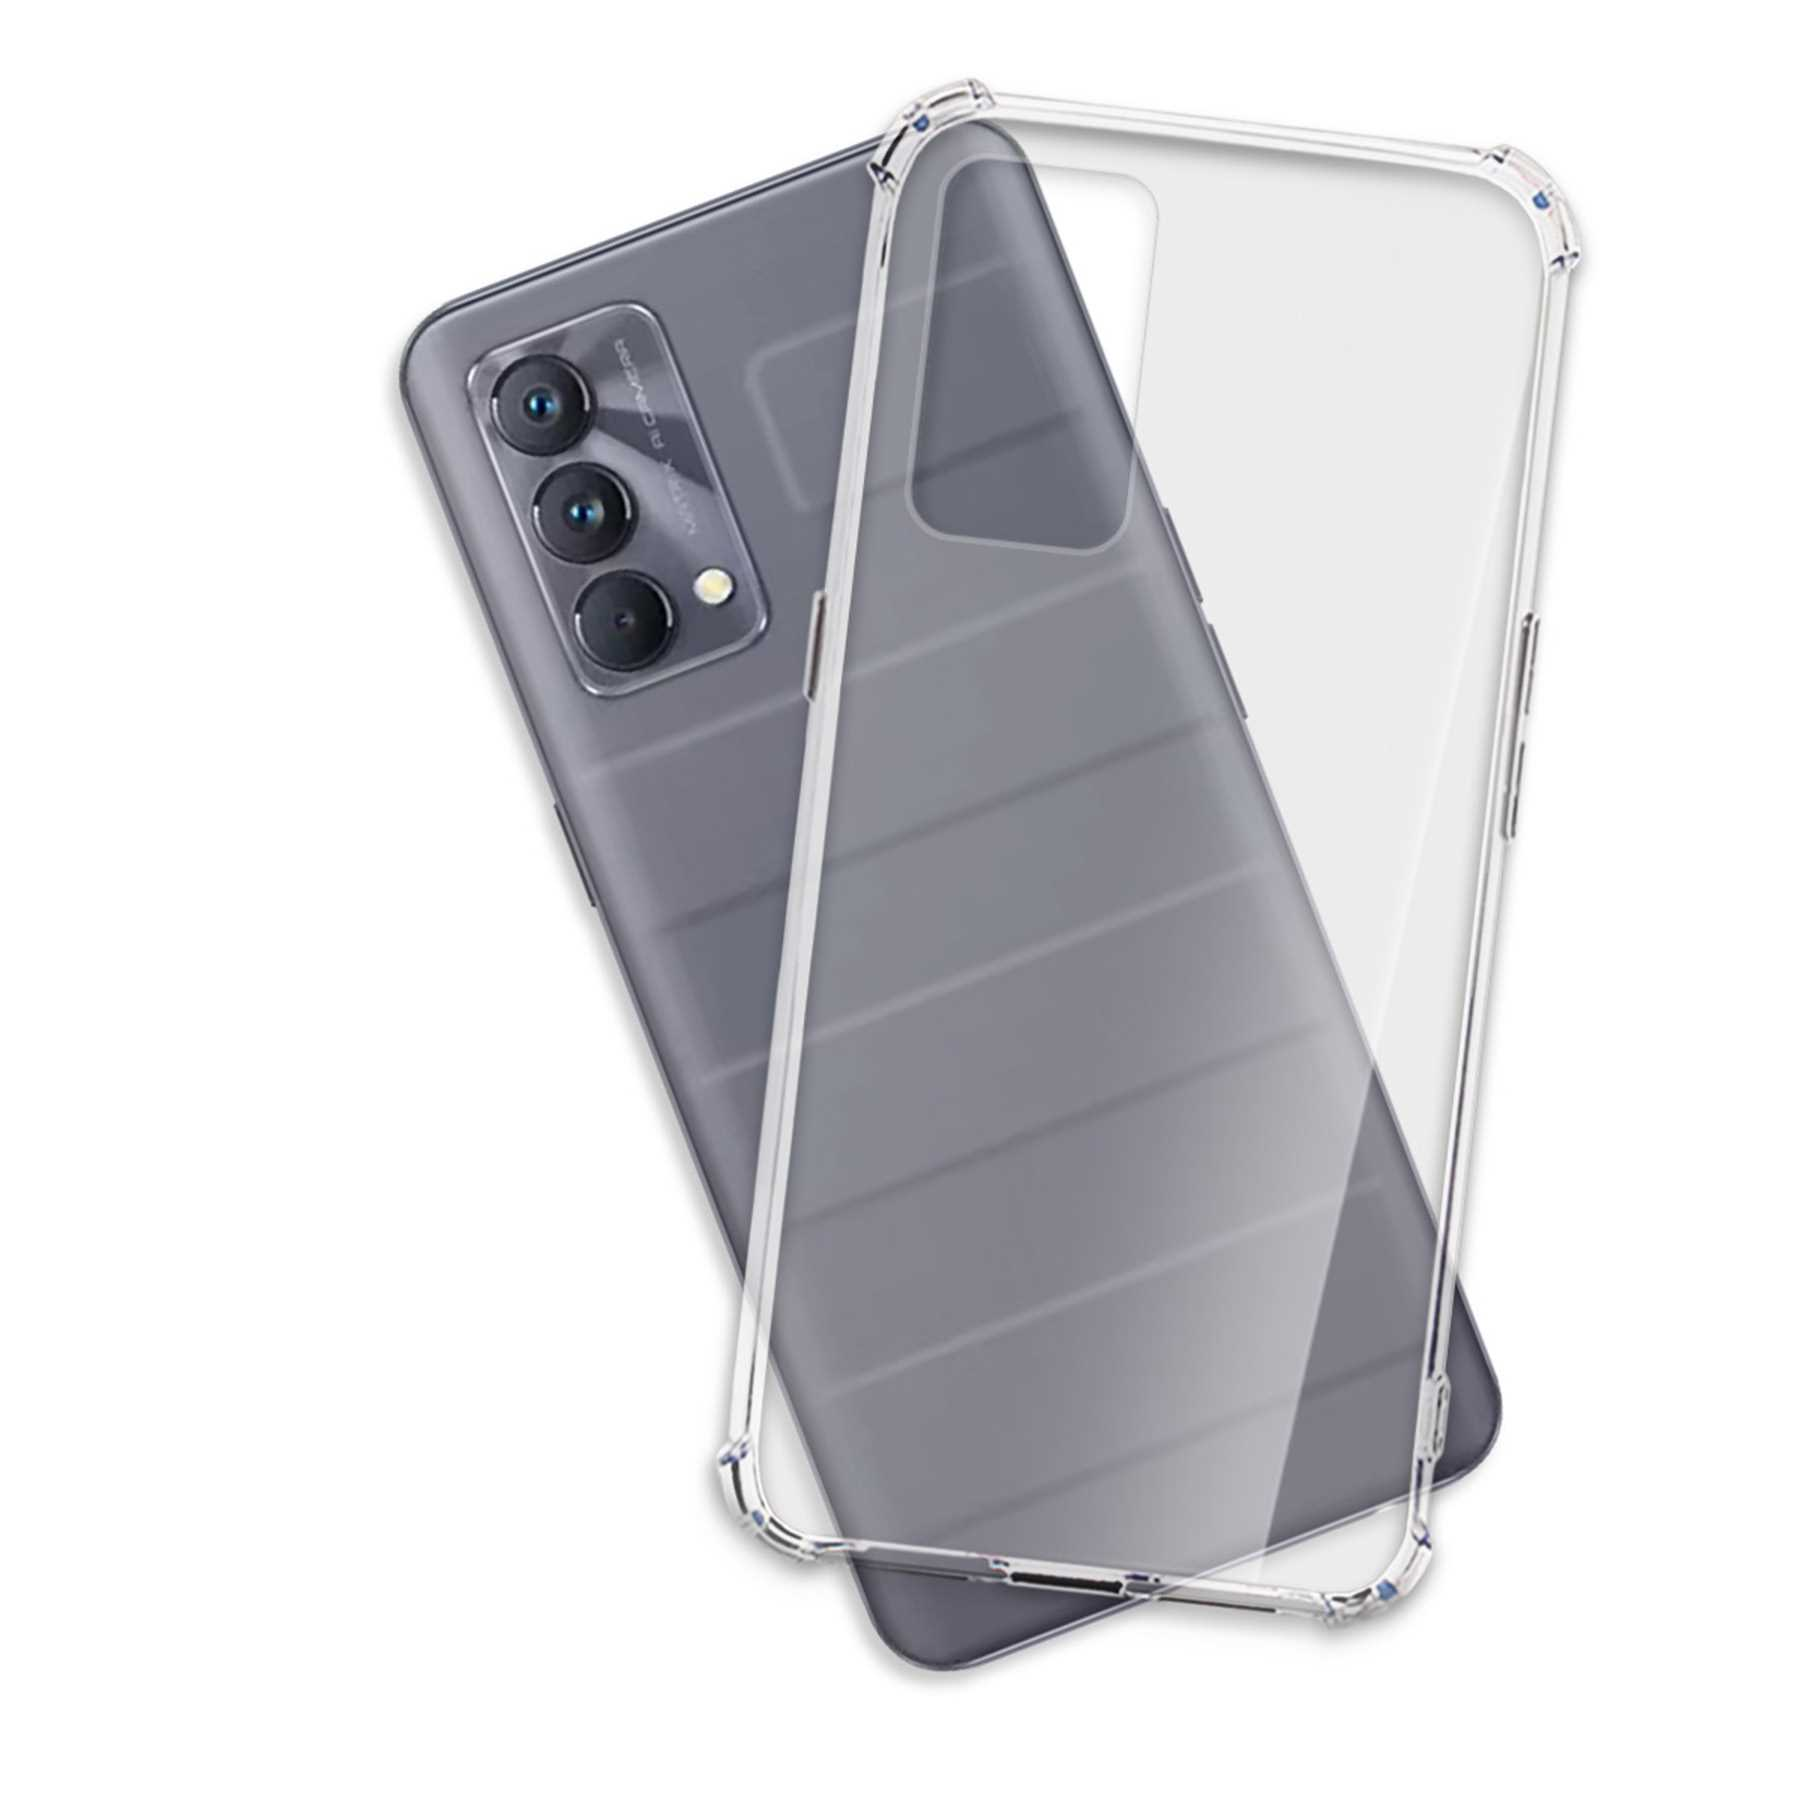 MTB MORE ENERGY Clear Case, Realme, Armor Backcover, Master Edition GT Transparent 5G